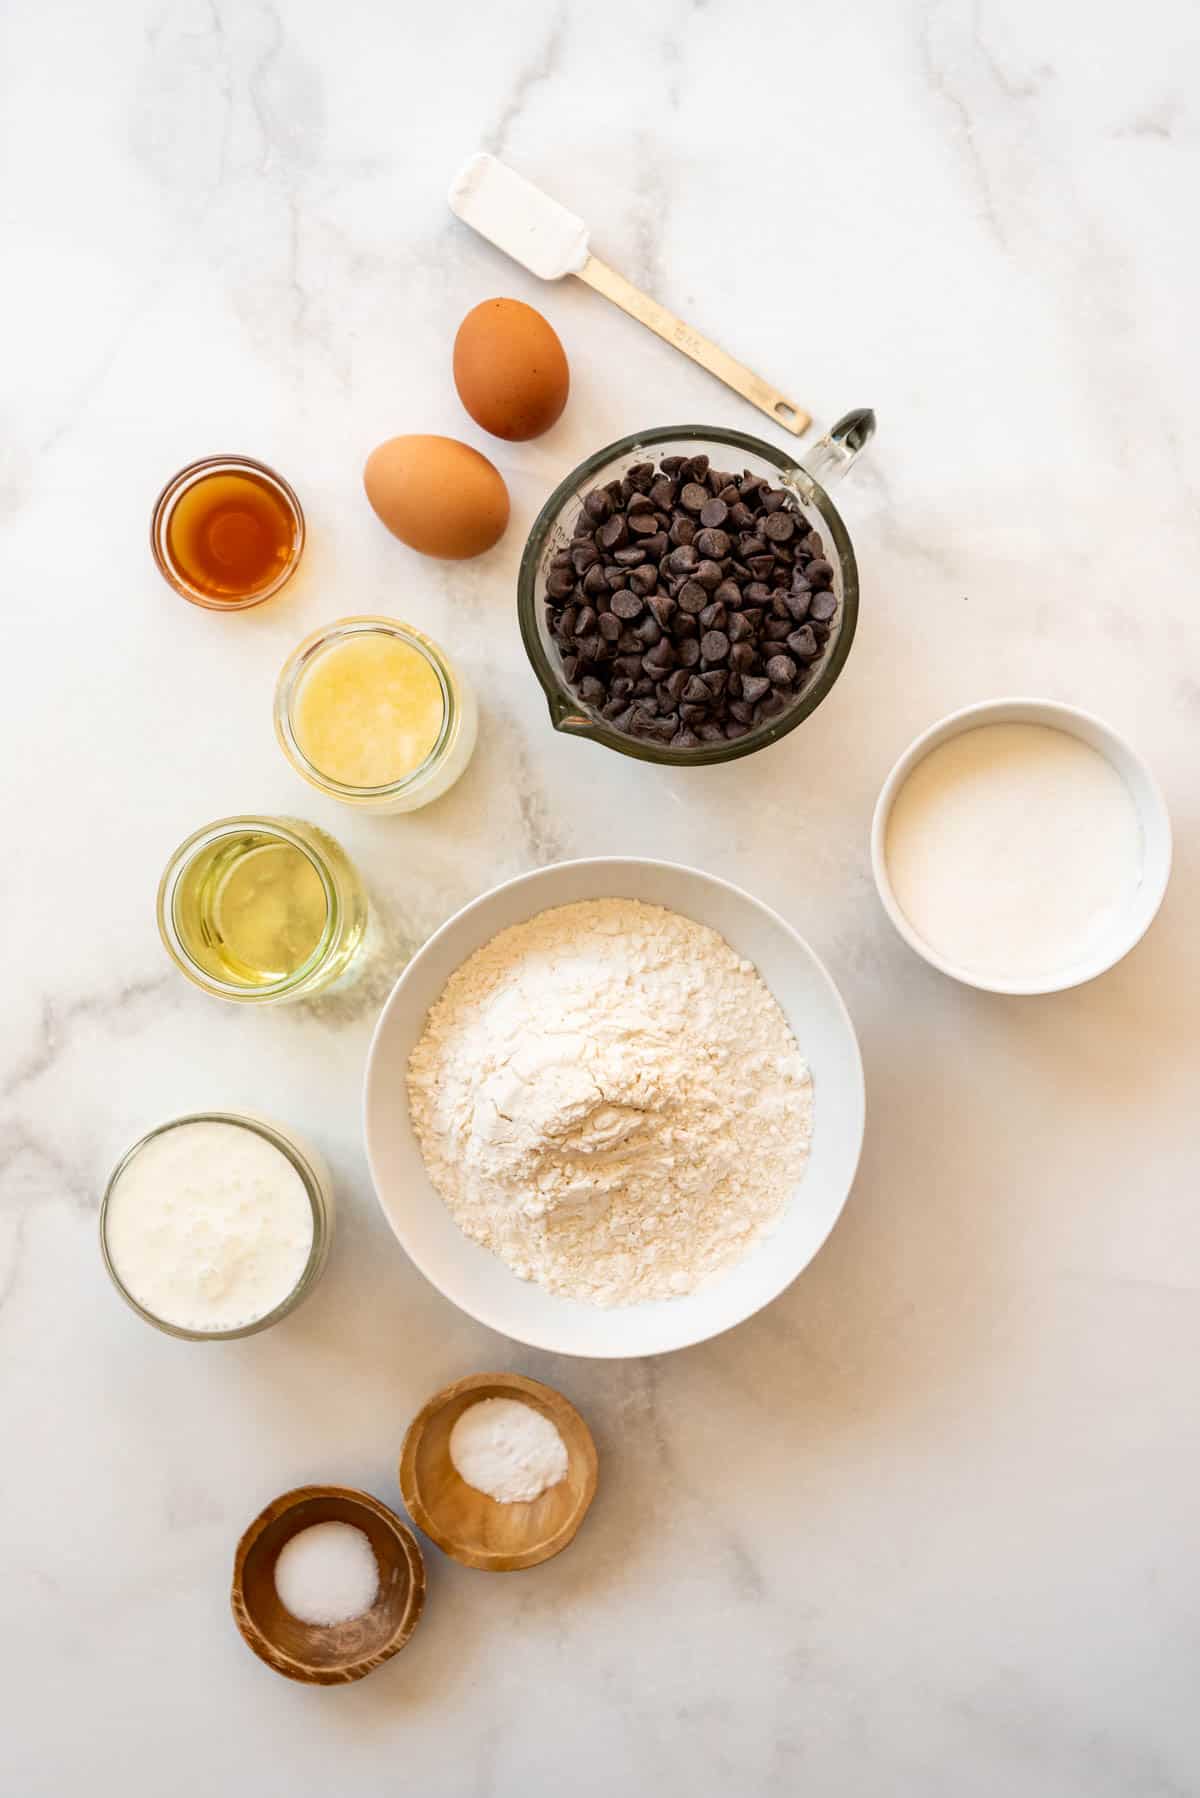 Ingredients for chocolate chip muffins.